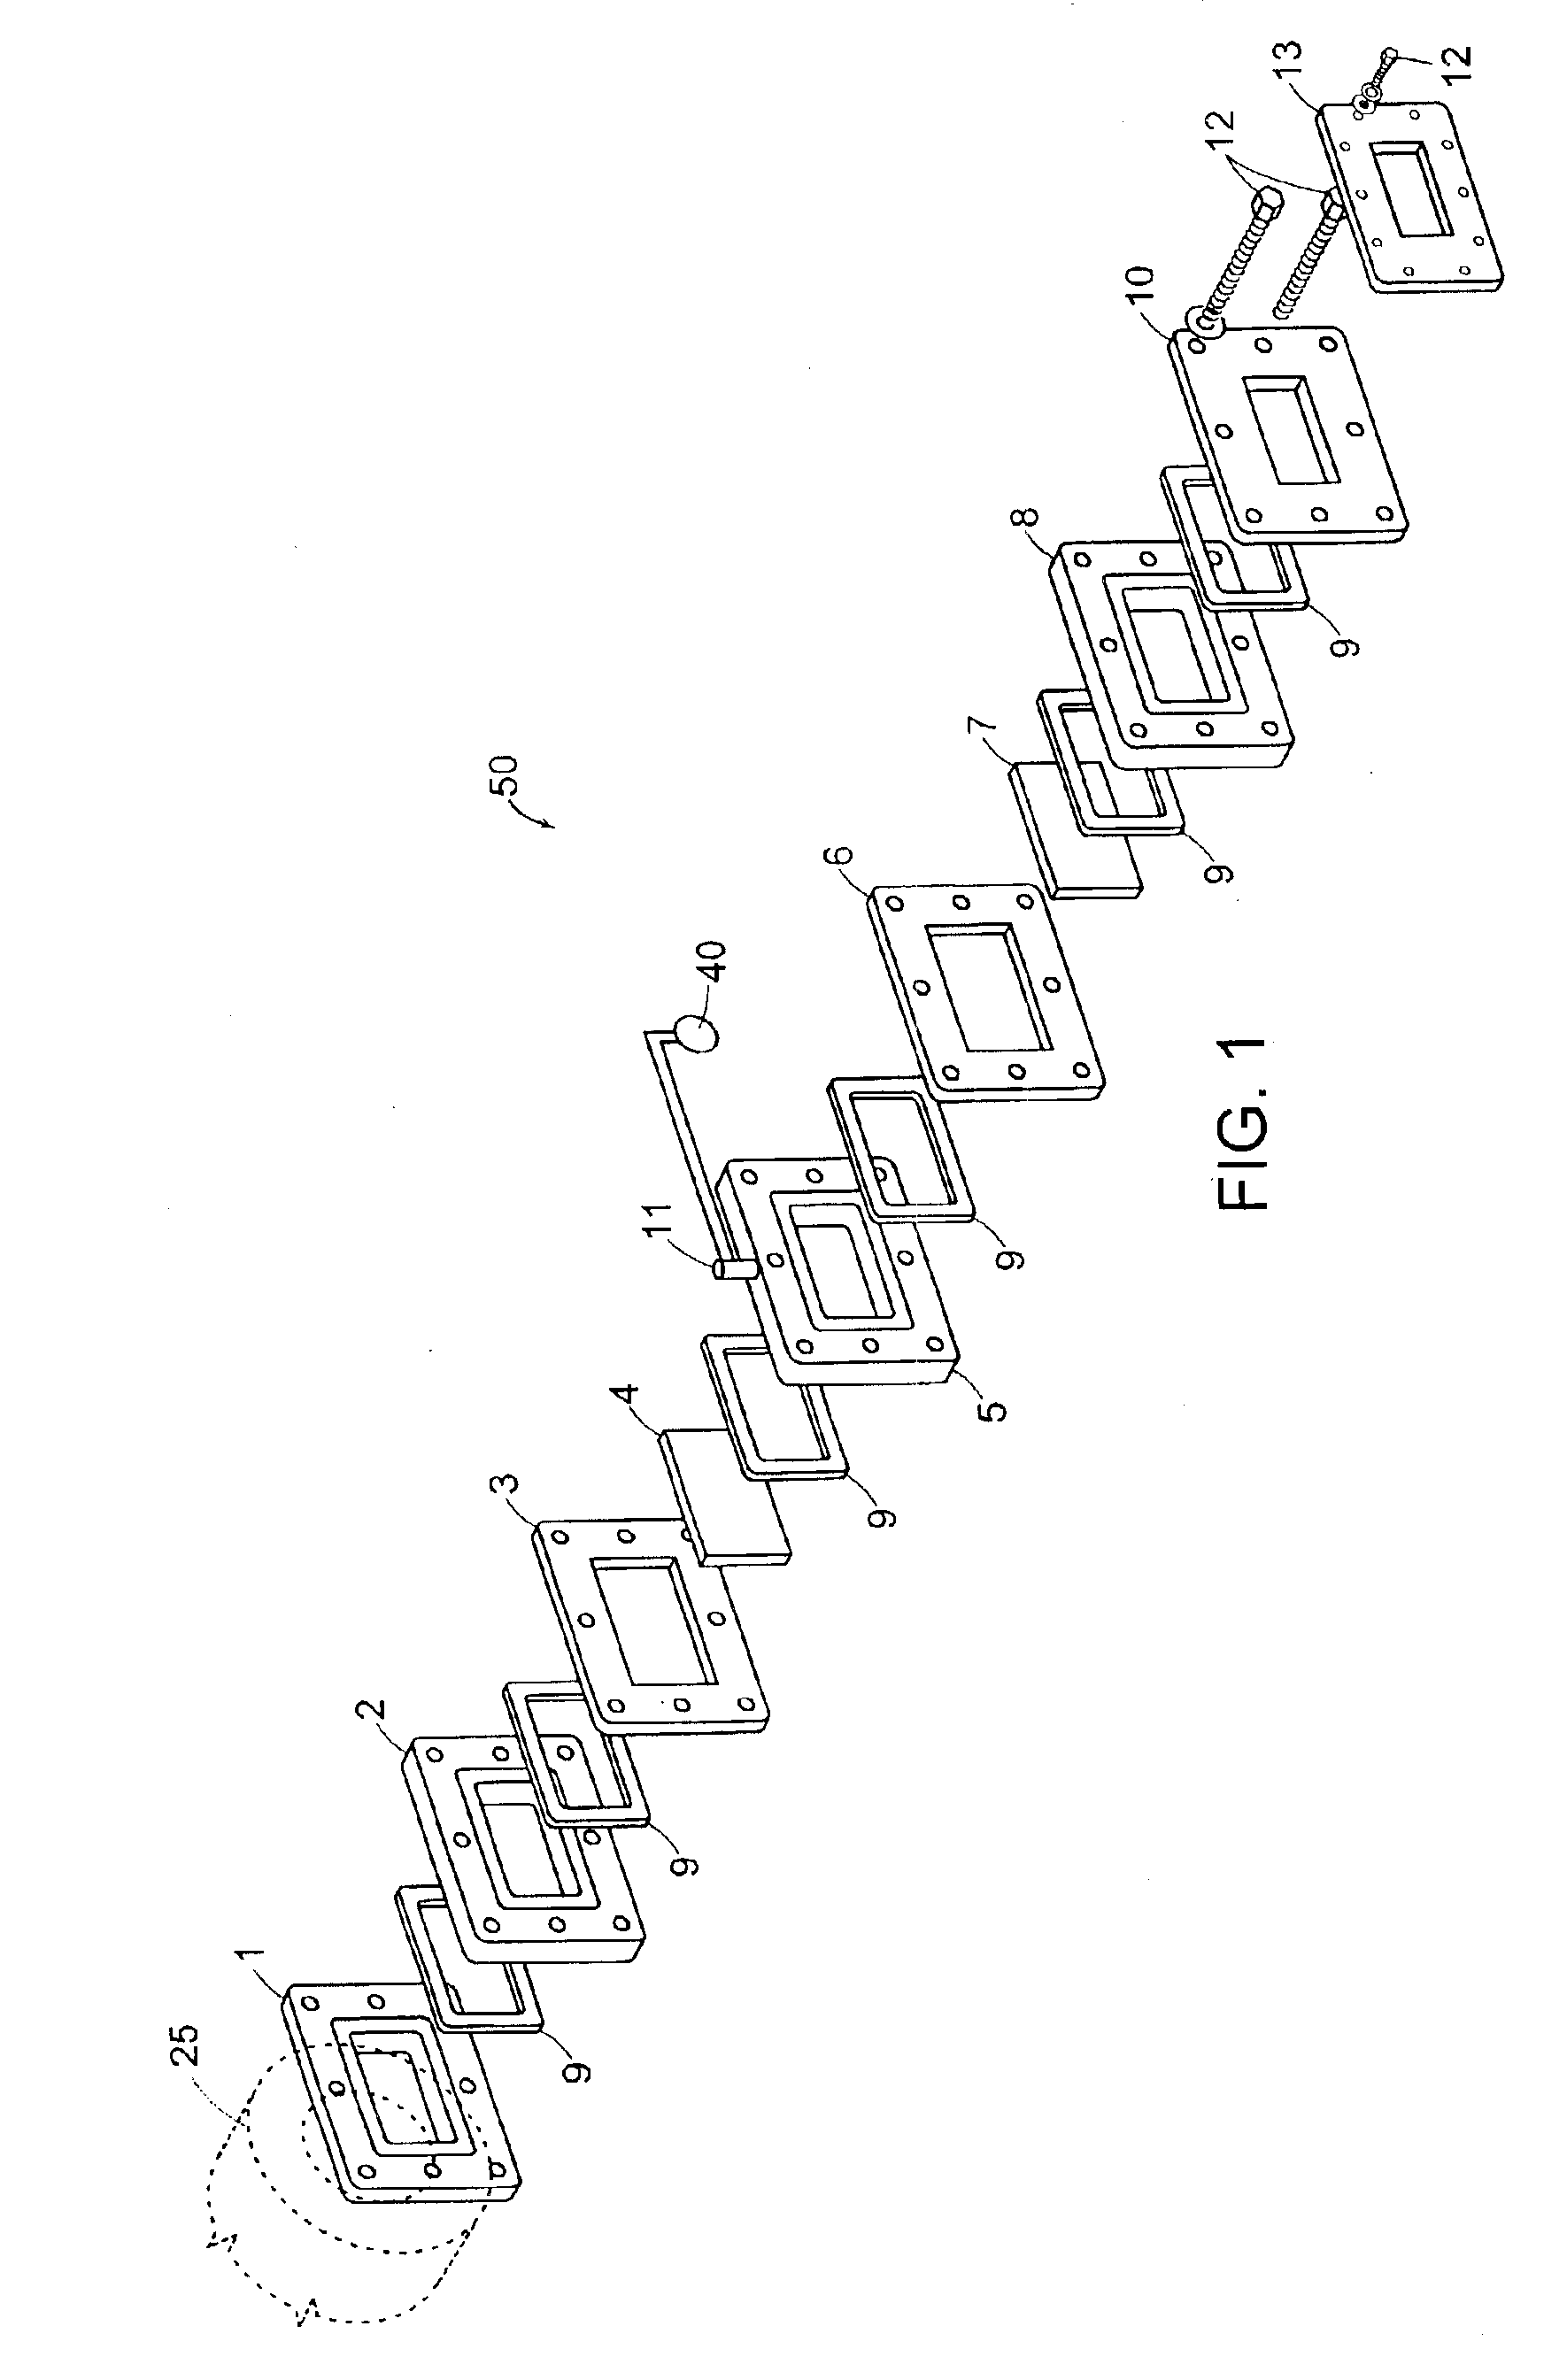 Device for transmitting electromagnetic waves through an aperture in a wall